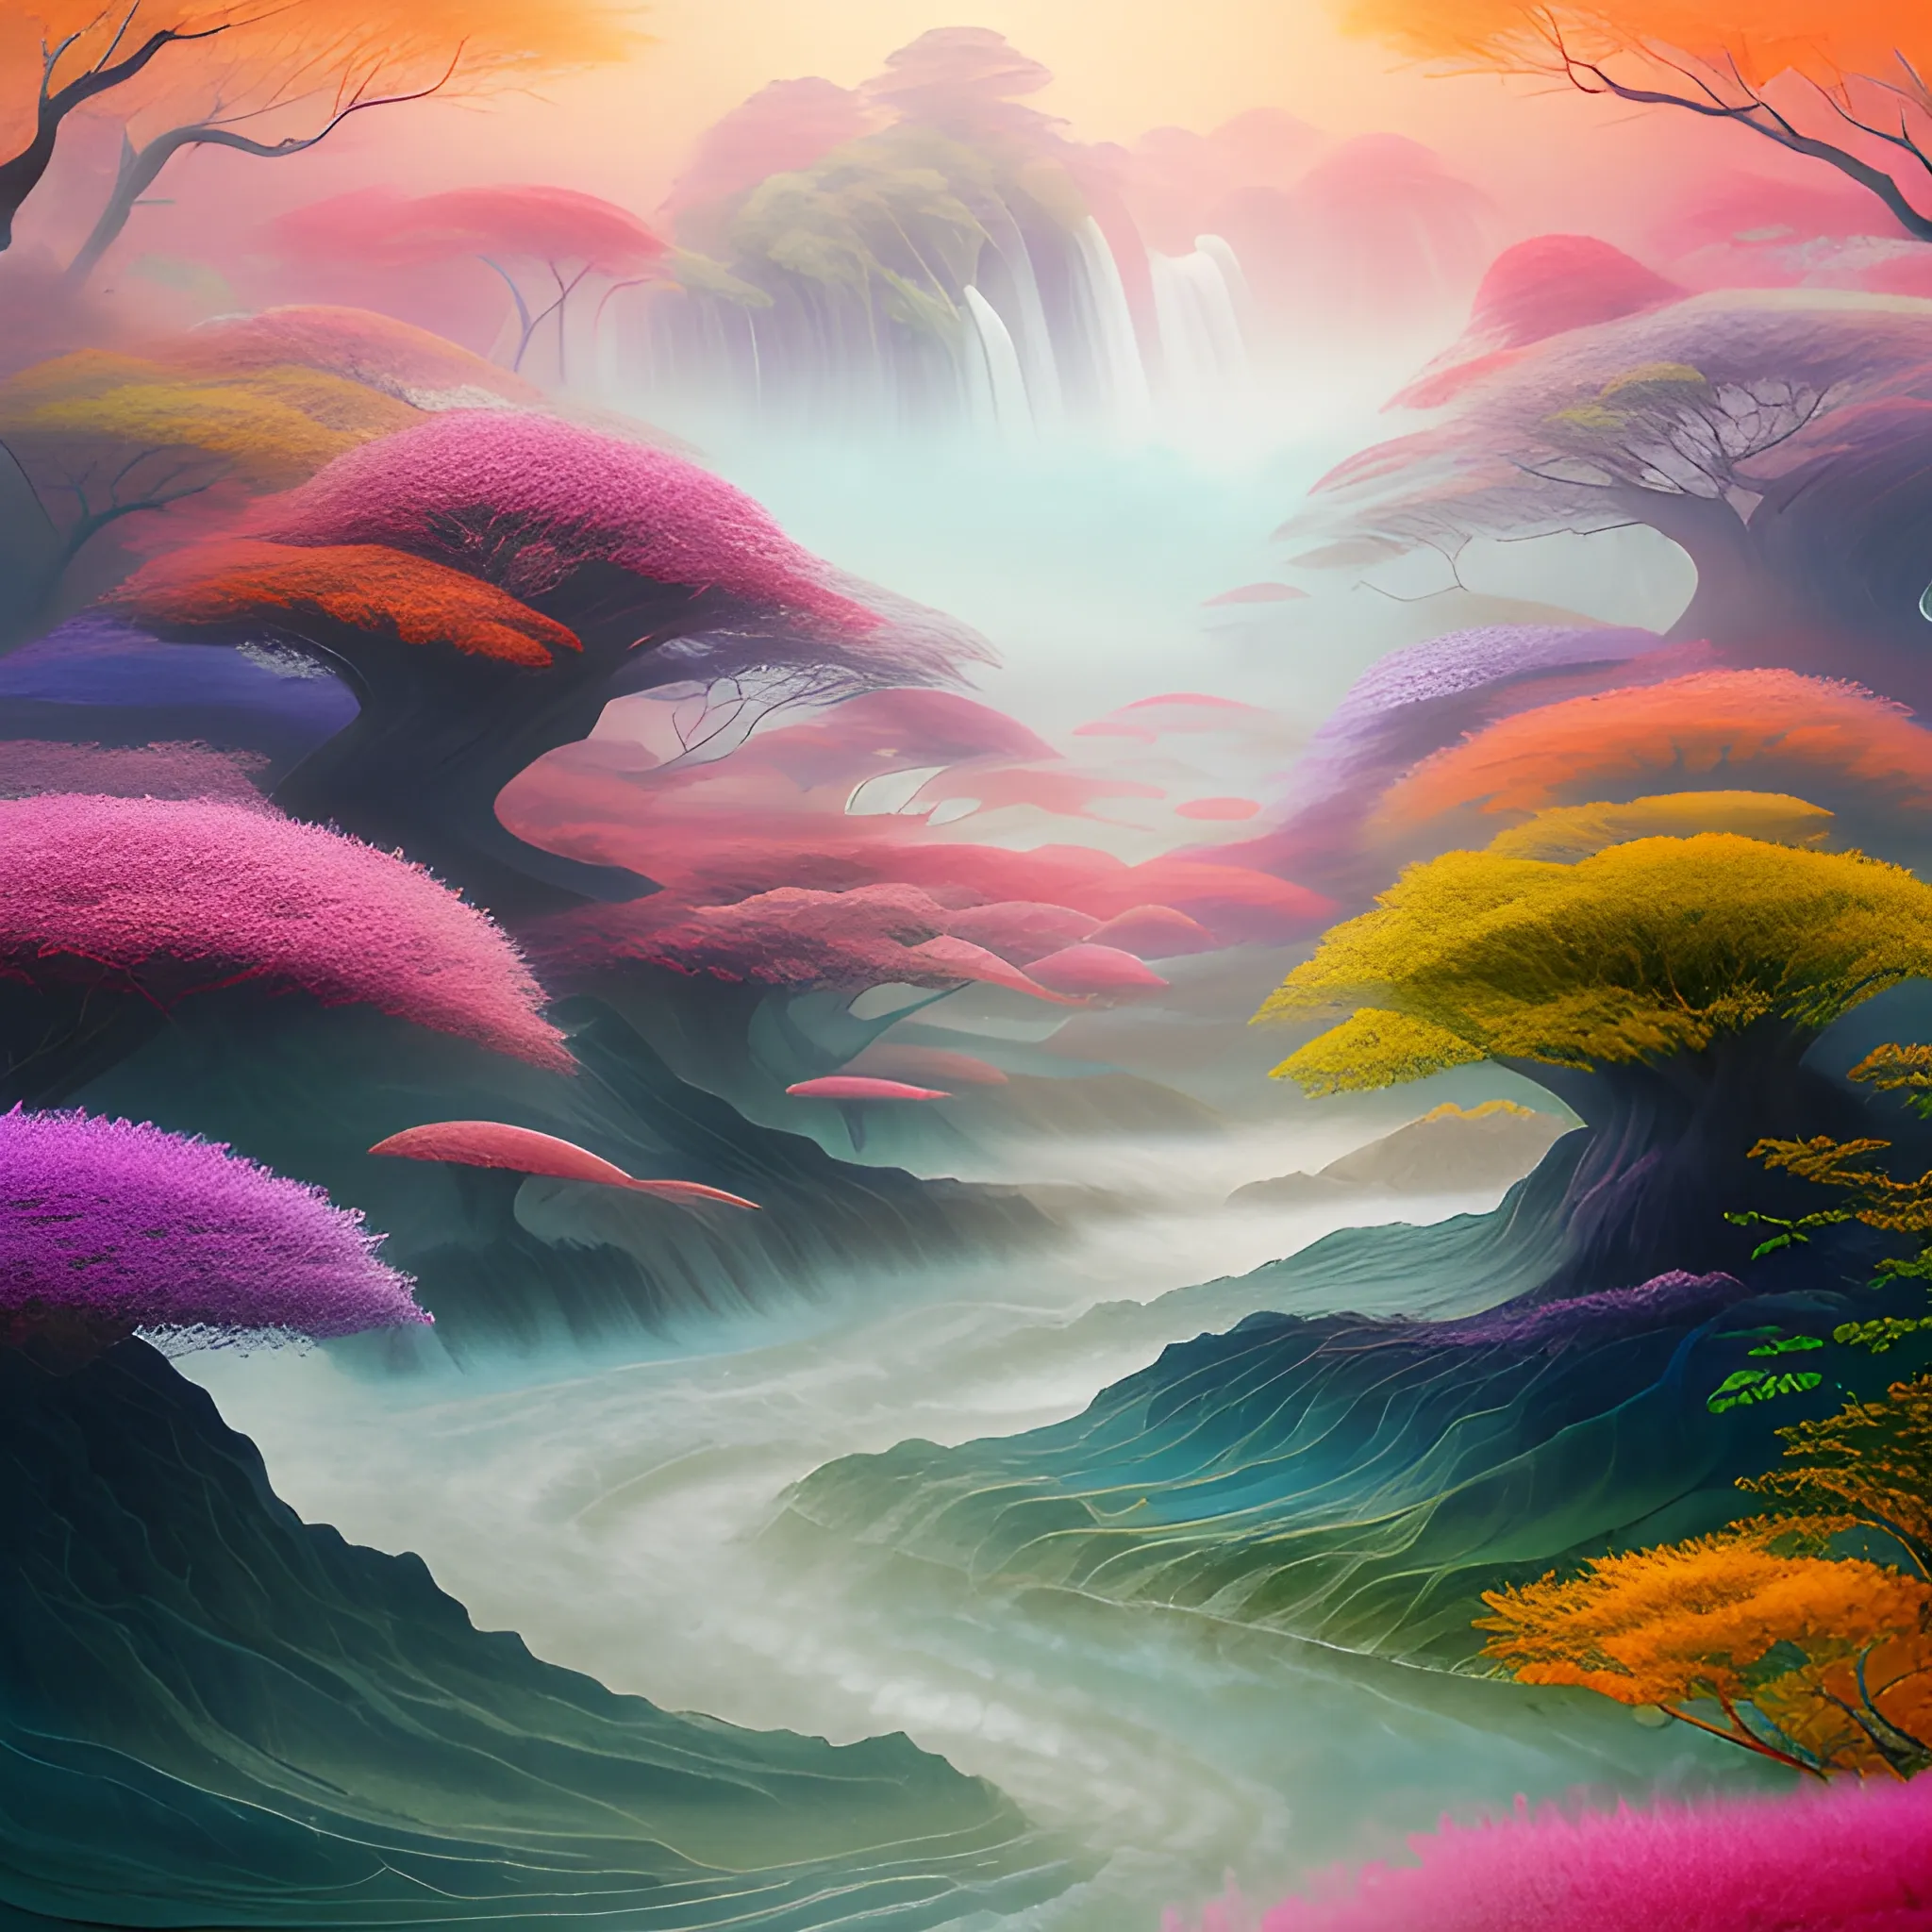 (by Ananta Mandal (and Andrew Biraj:0.5)), (in the style of nihonga), Style: Abstract, Medium: Digital illustration, Subject: An otherworldly landscape with floating islands, cascading waterfalls, and vibrant flora and fauna. Camera Angle: Overhead shot capturing the vastness and intricate details of the scene. The colors are saturated, and the lighting creates a warm and ethereal atmosphere. The painting is highly detailed, with every brushstroke capturing the complexity of the imaginary world., (high quality), (detailed), (masterpiece), (best quality), (highres), (extremely detailed), (8k), Oil Painting, Water Color